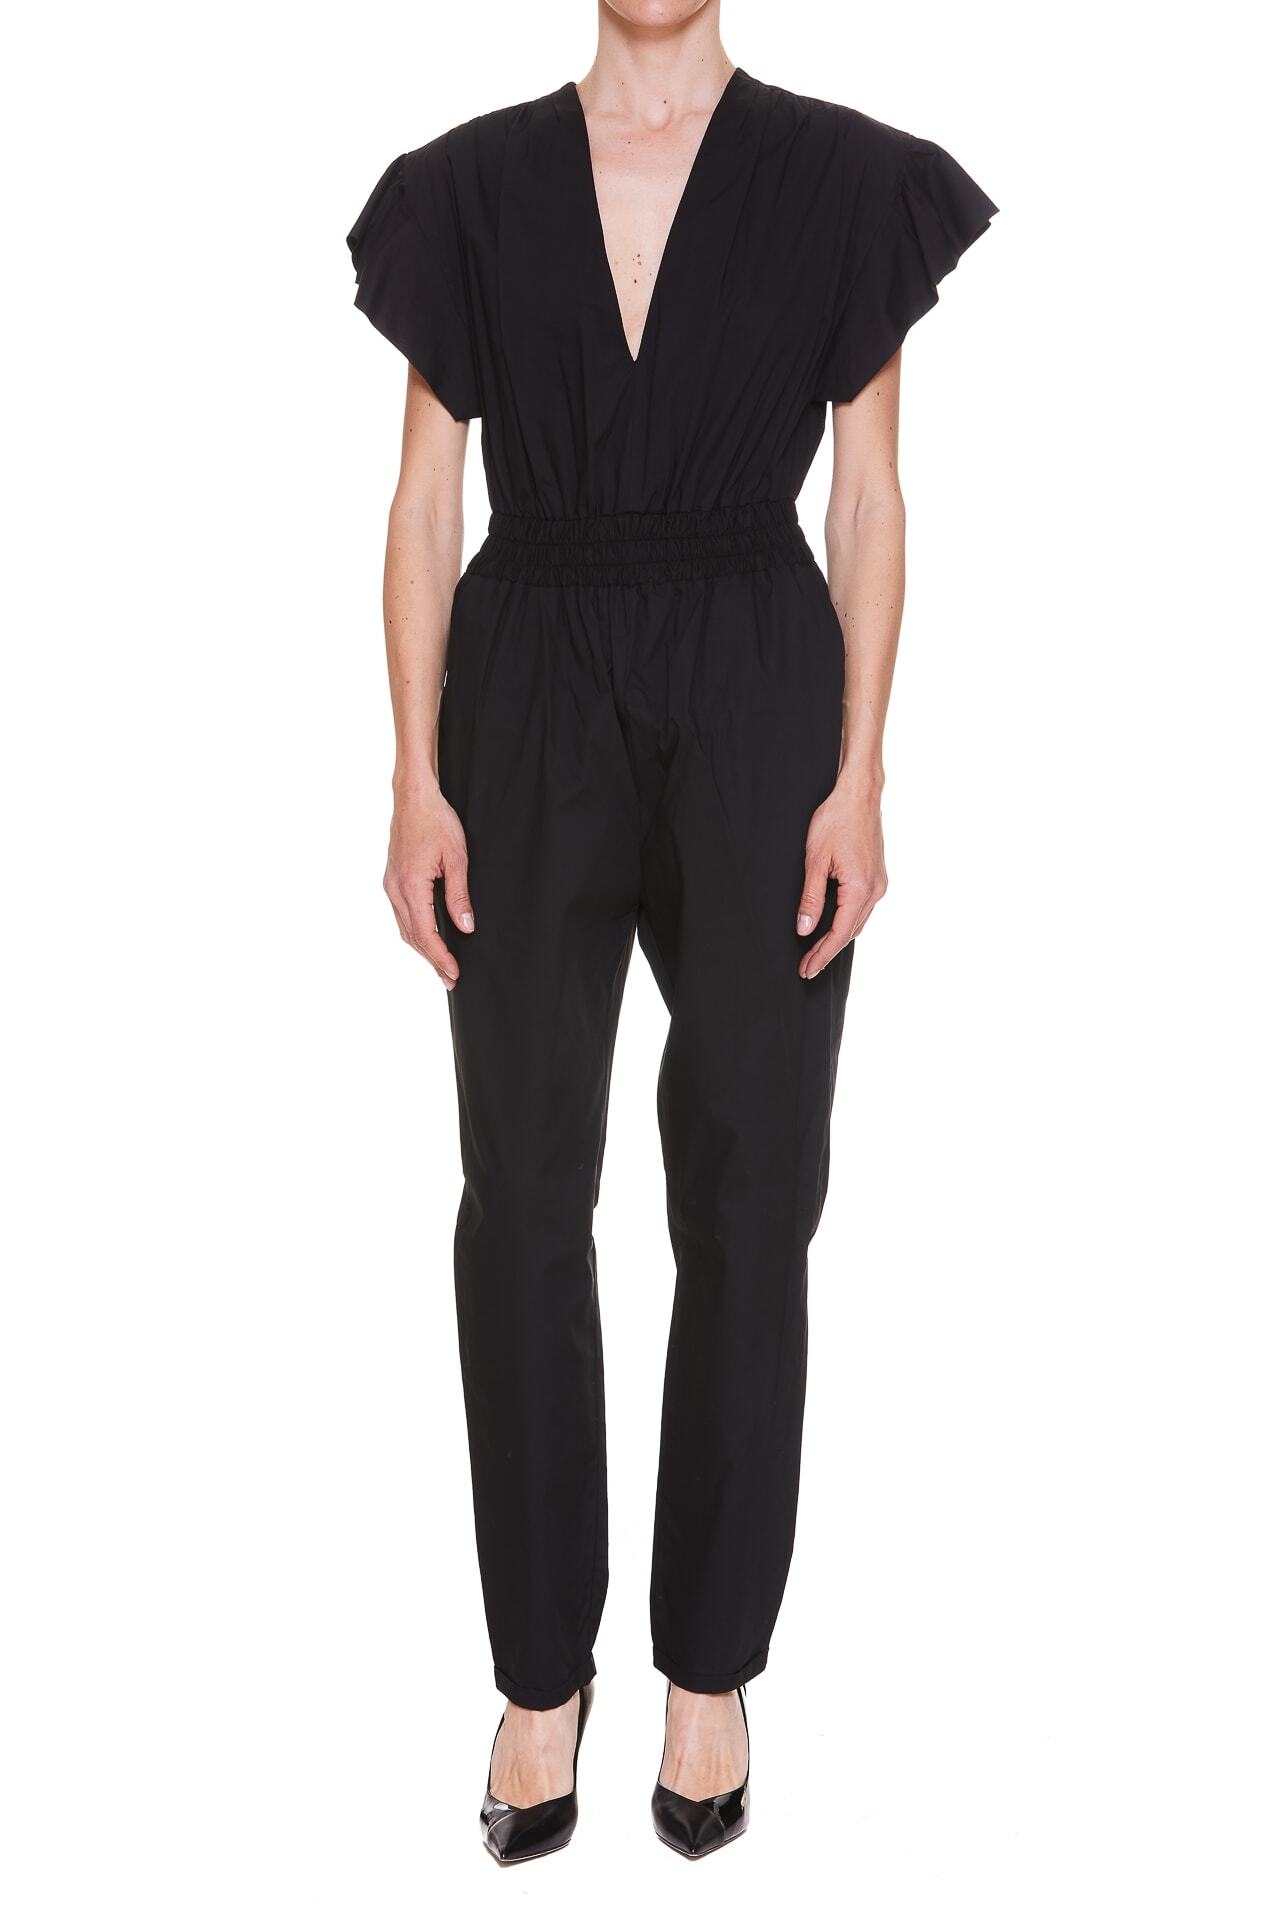 Pinko Diolo Jumpsuit in black